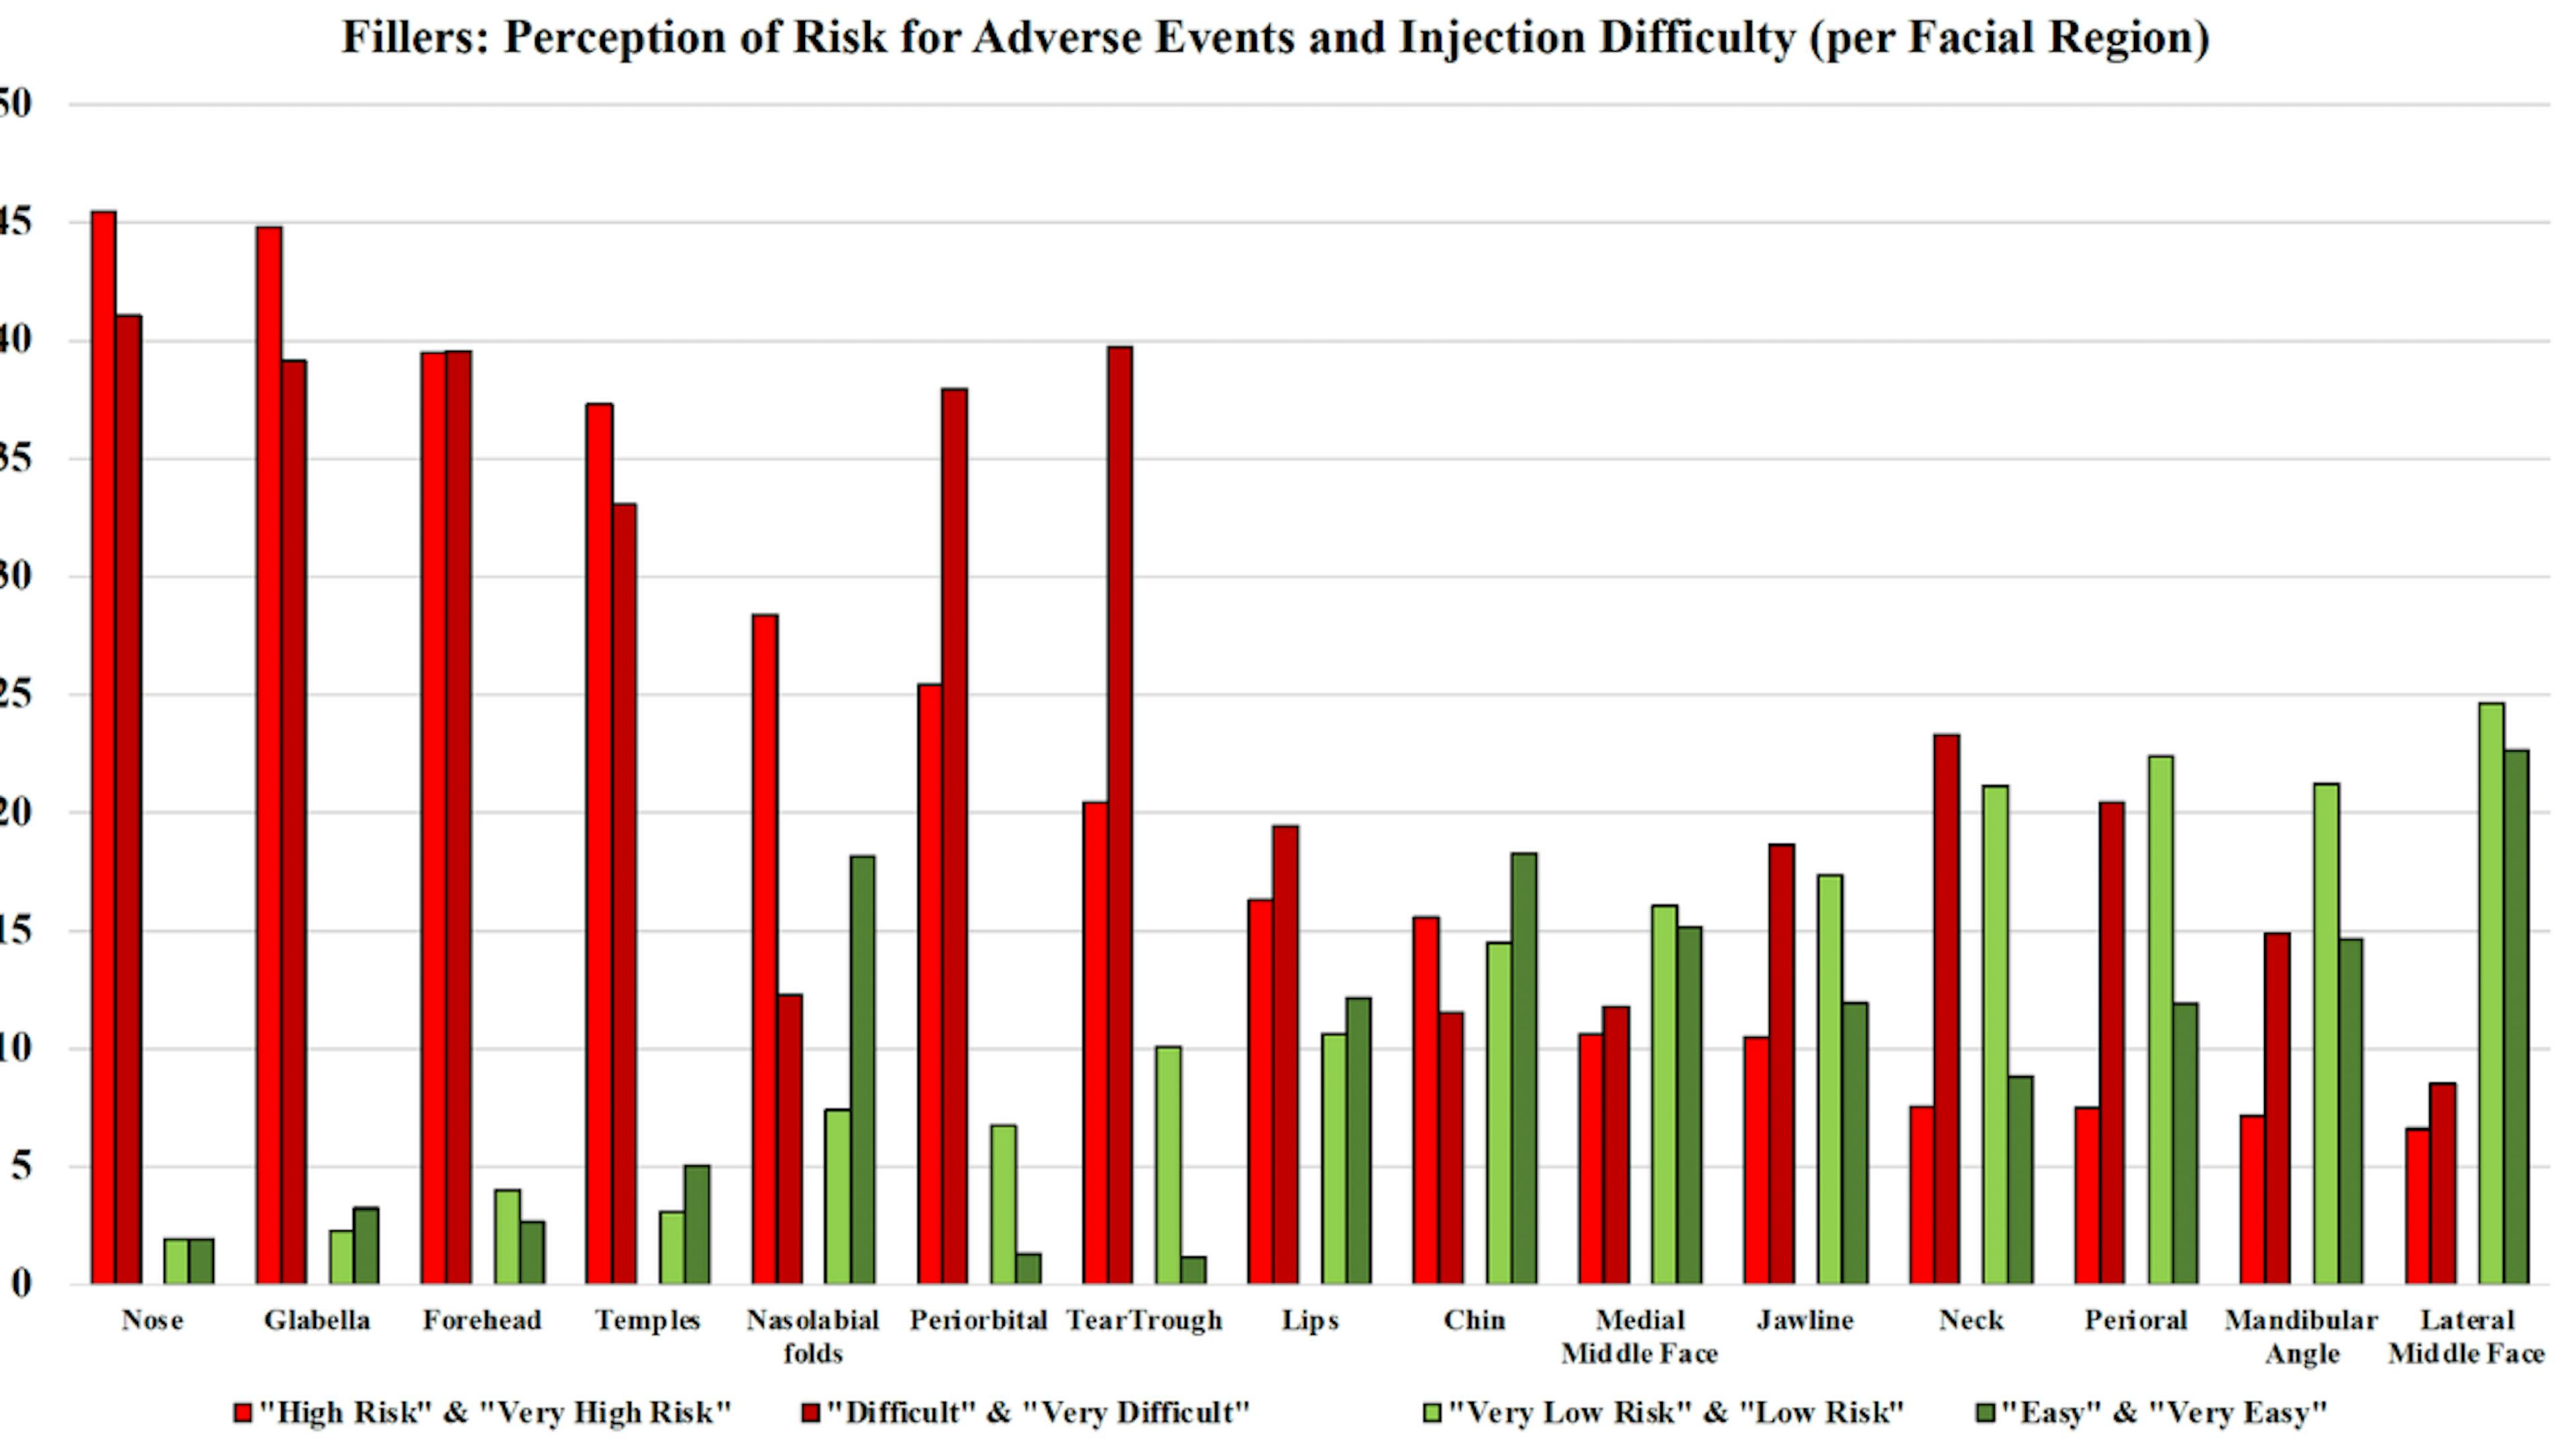 Harley Academy Aesthetic Medicine Education Research Chart on Perception of Risk for Adverse Events and Difficulty 